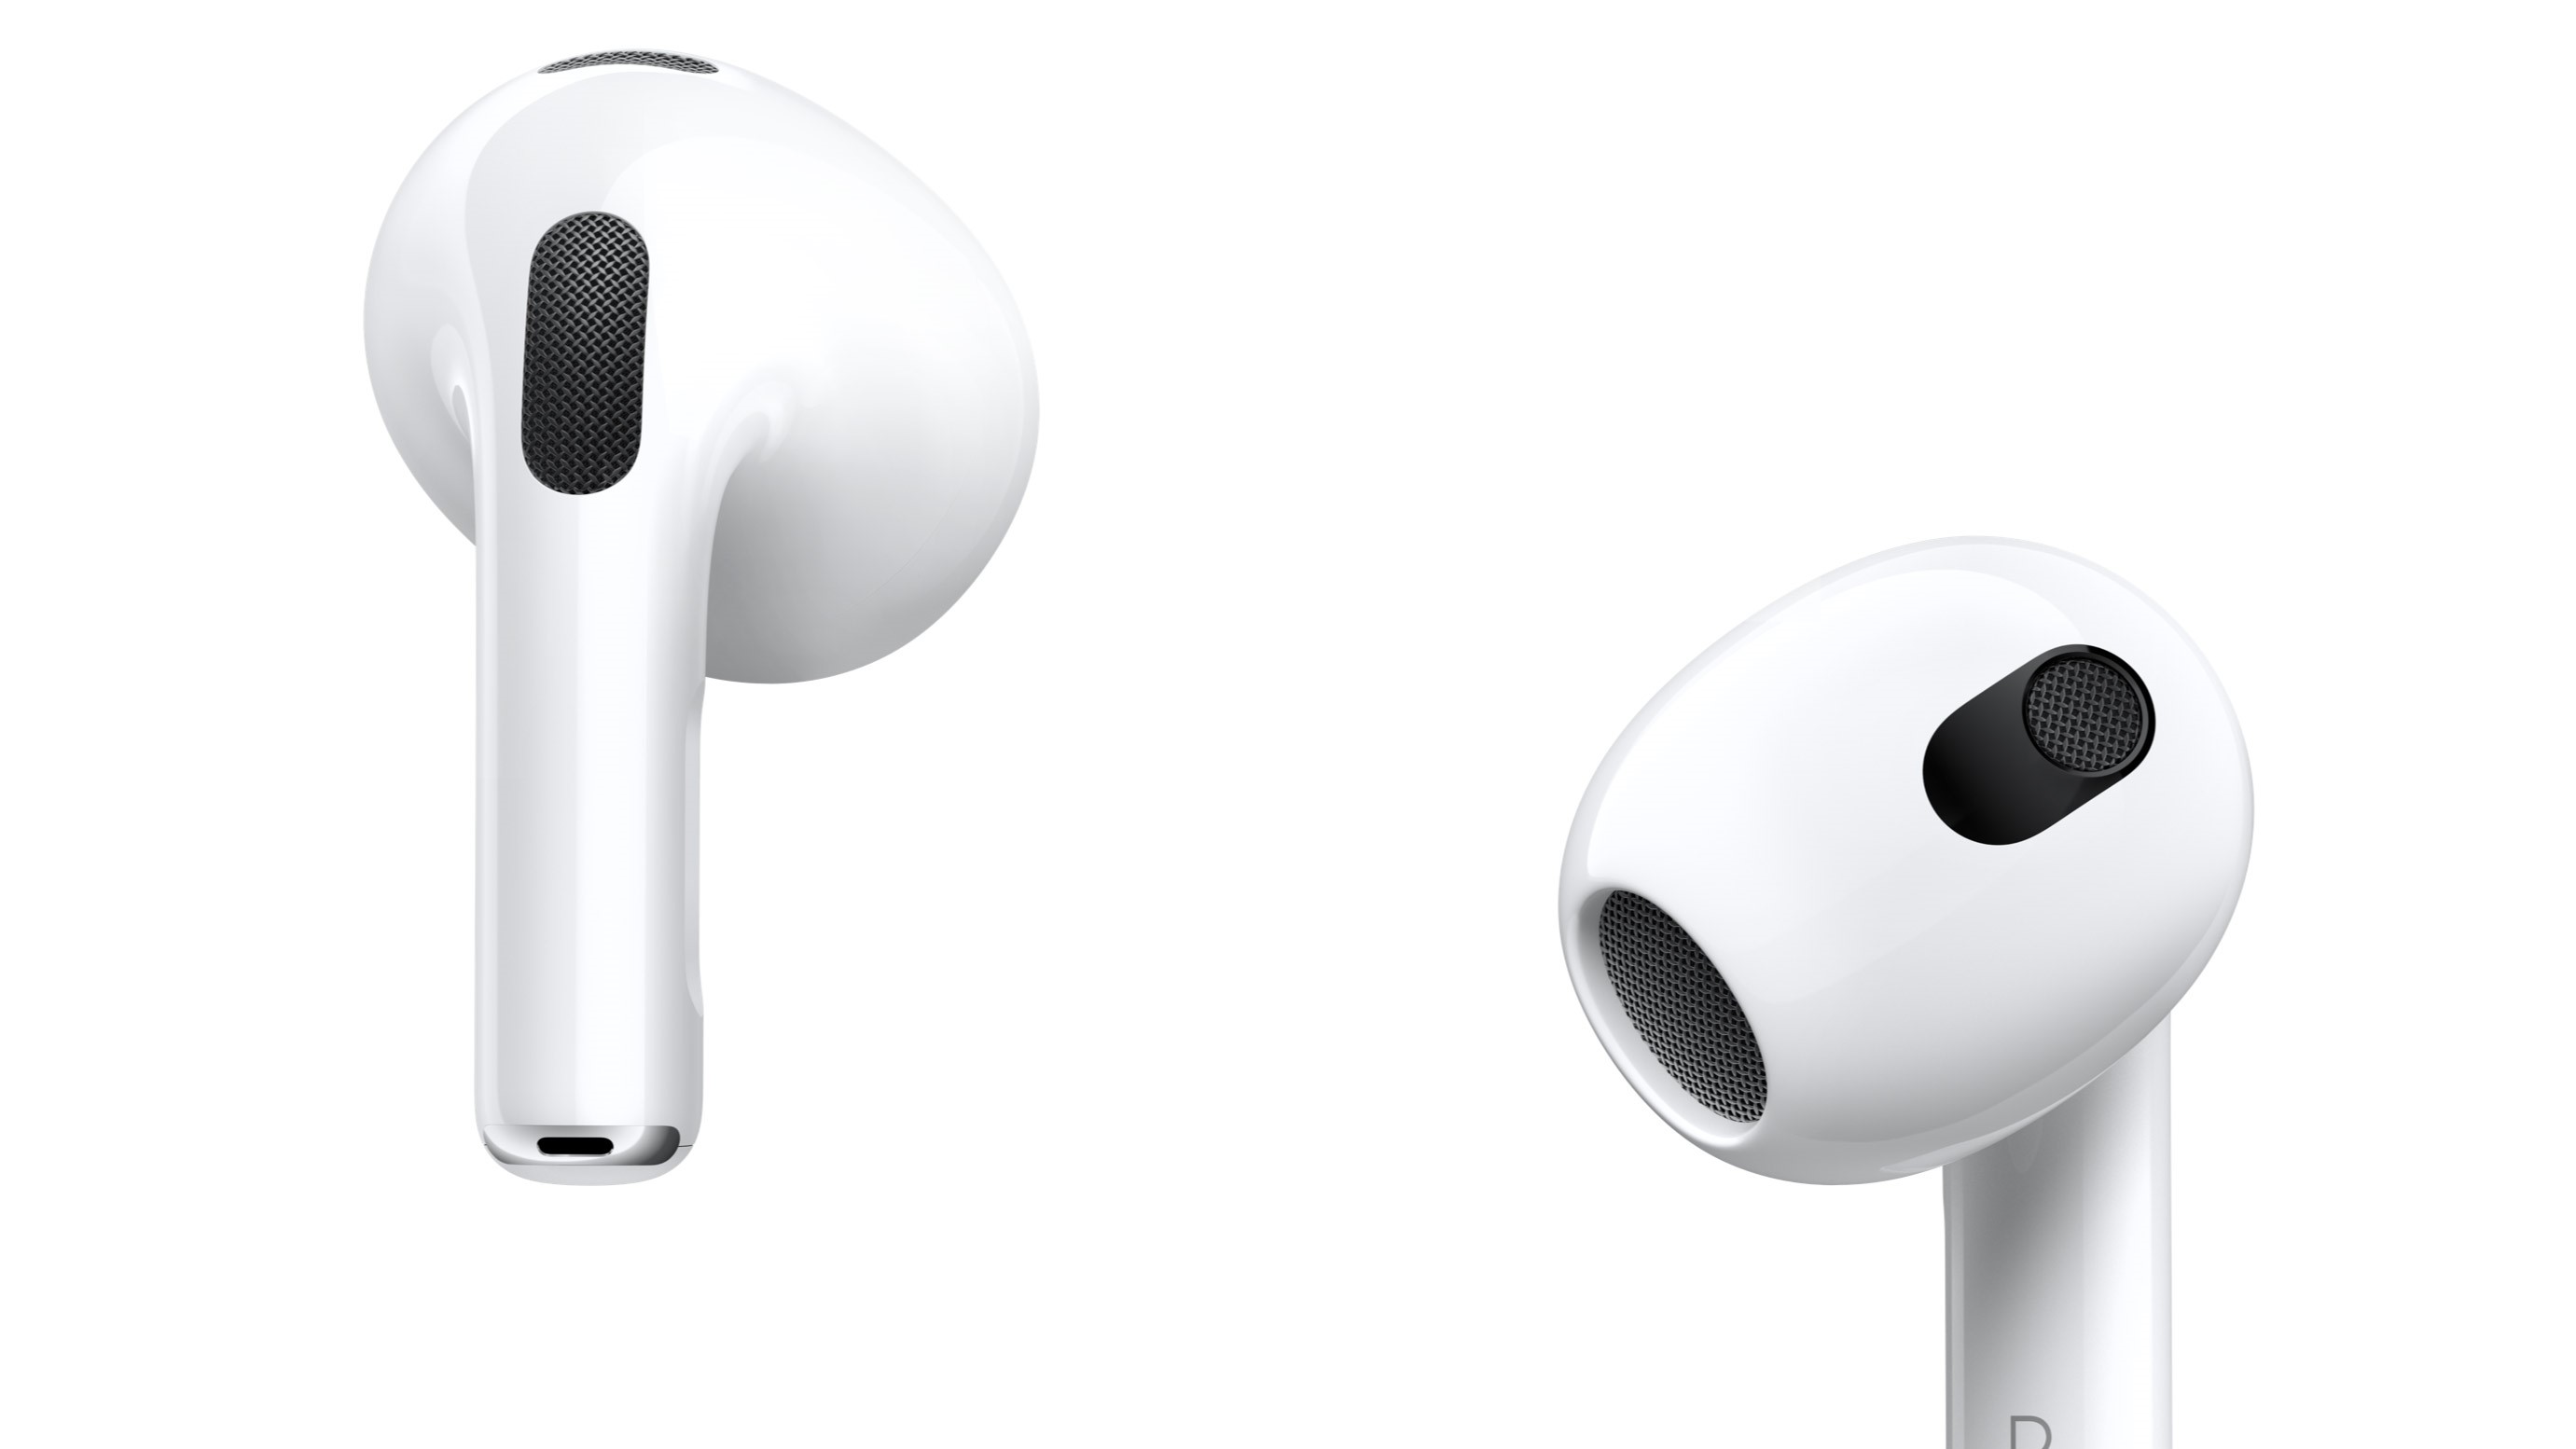 Next-gen AirPods will double as OTC hearing aids - NotebookCheck 